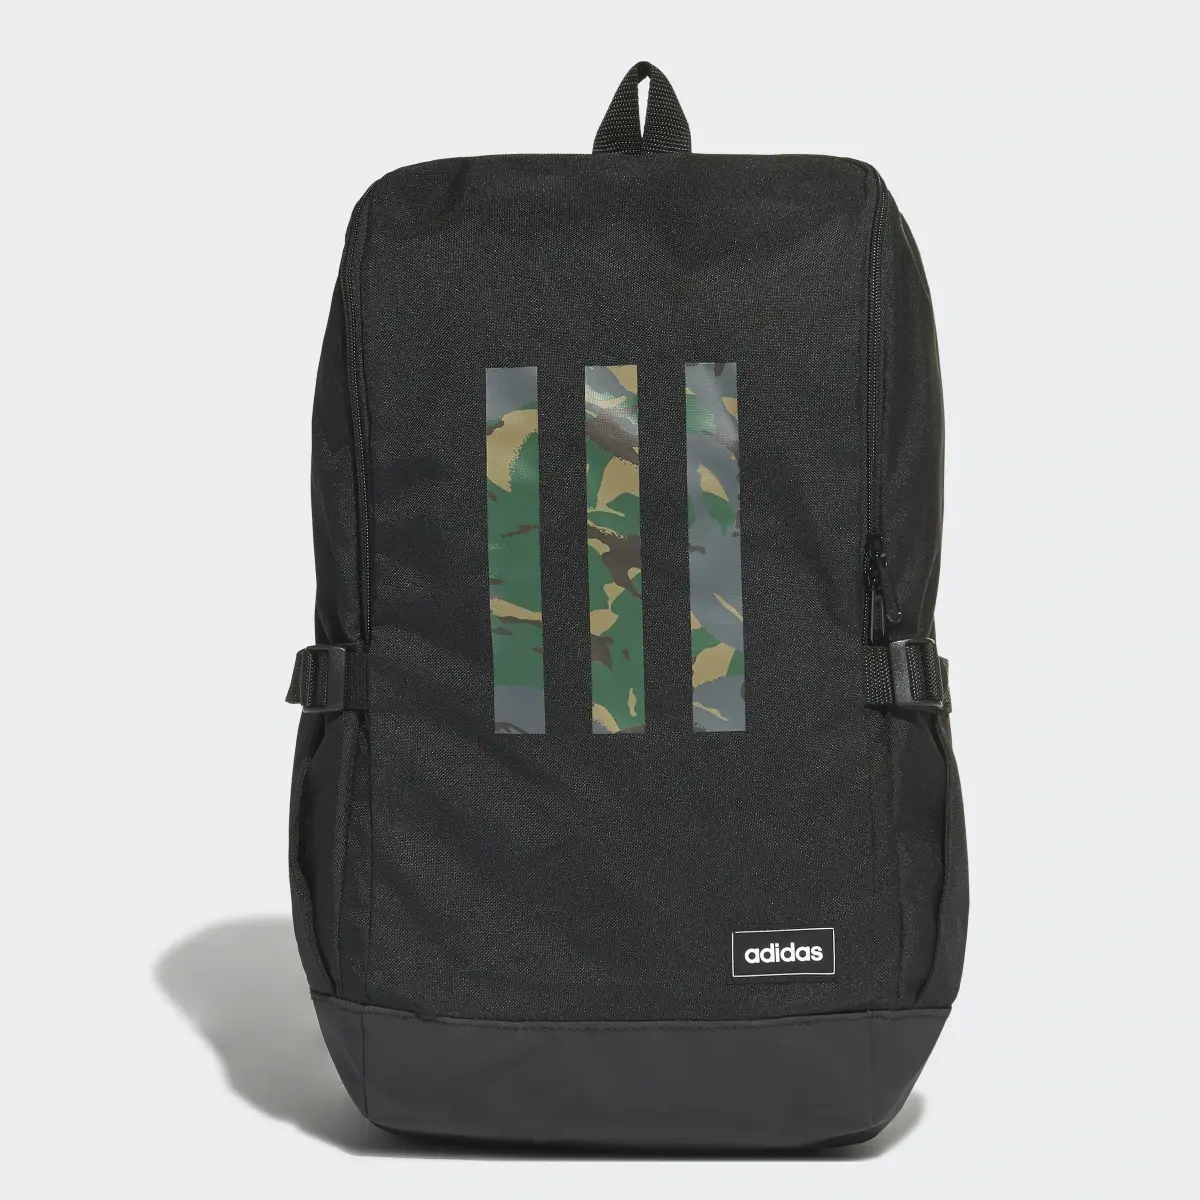 Adidas Classic Response Camouflage Backpack. 2